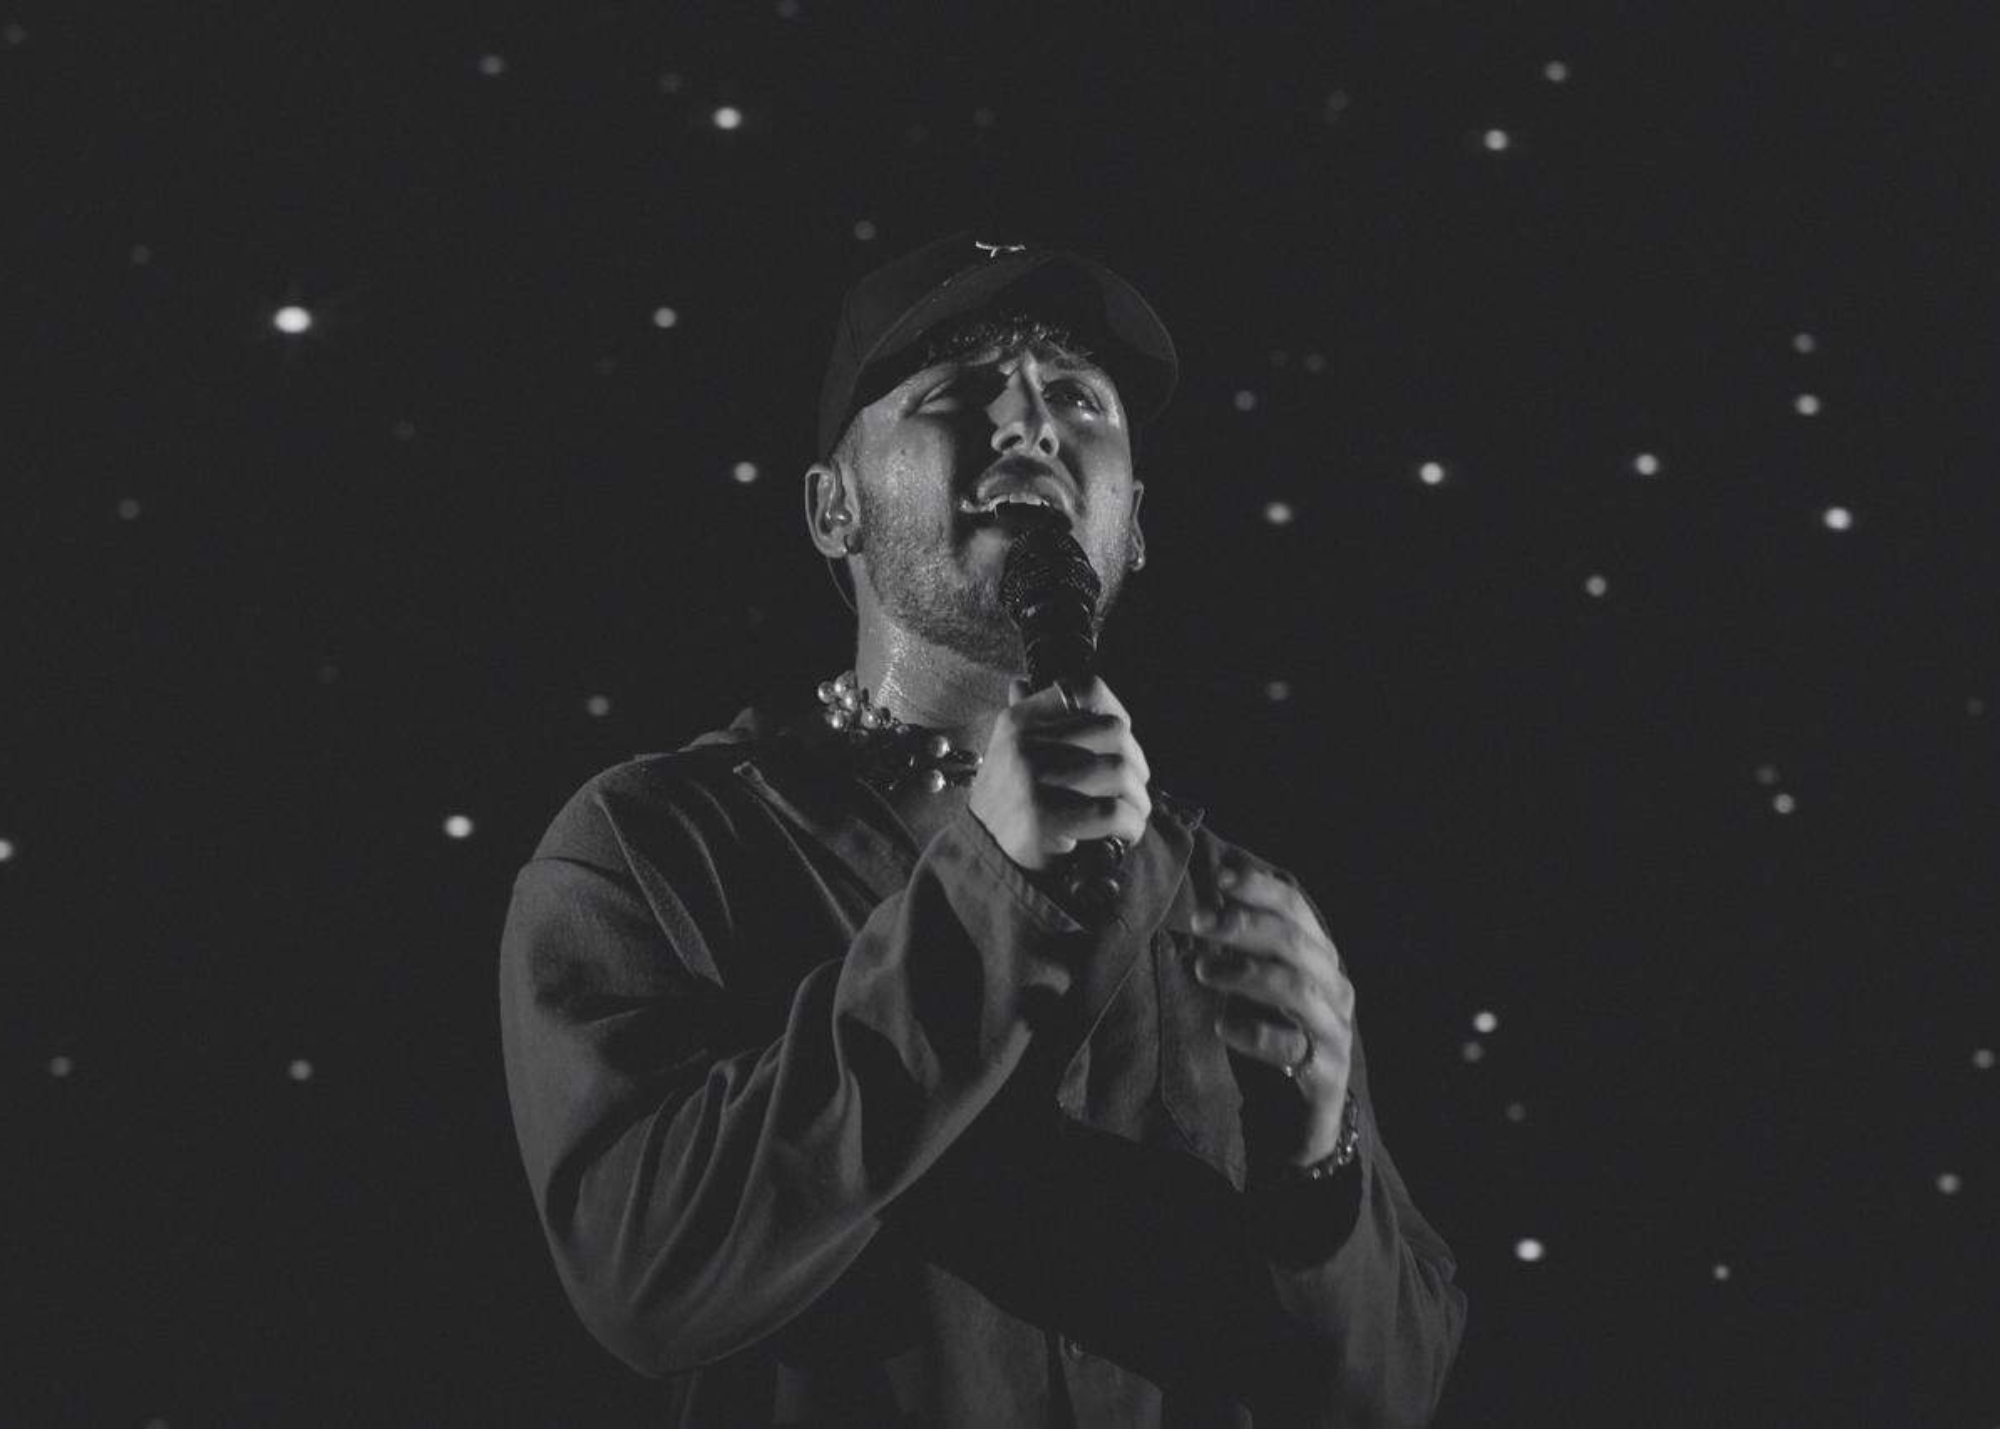 A grayscale photo of Andrew Bazzi holding a microphone while singing